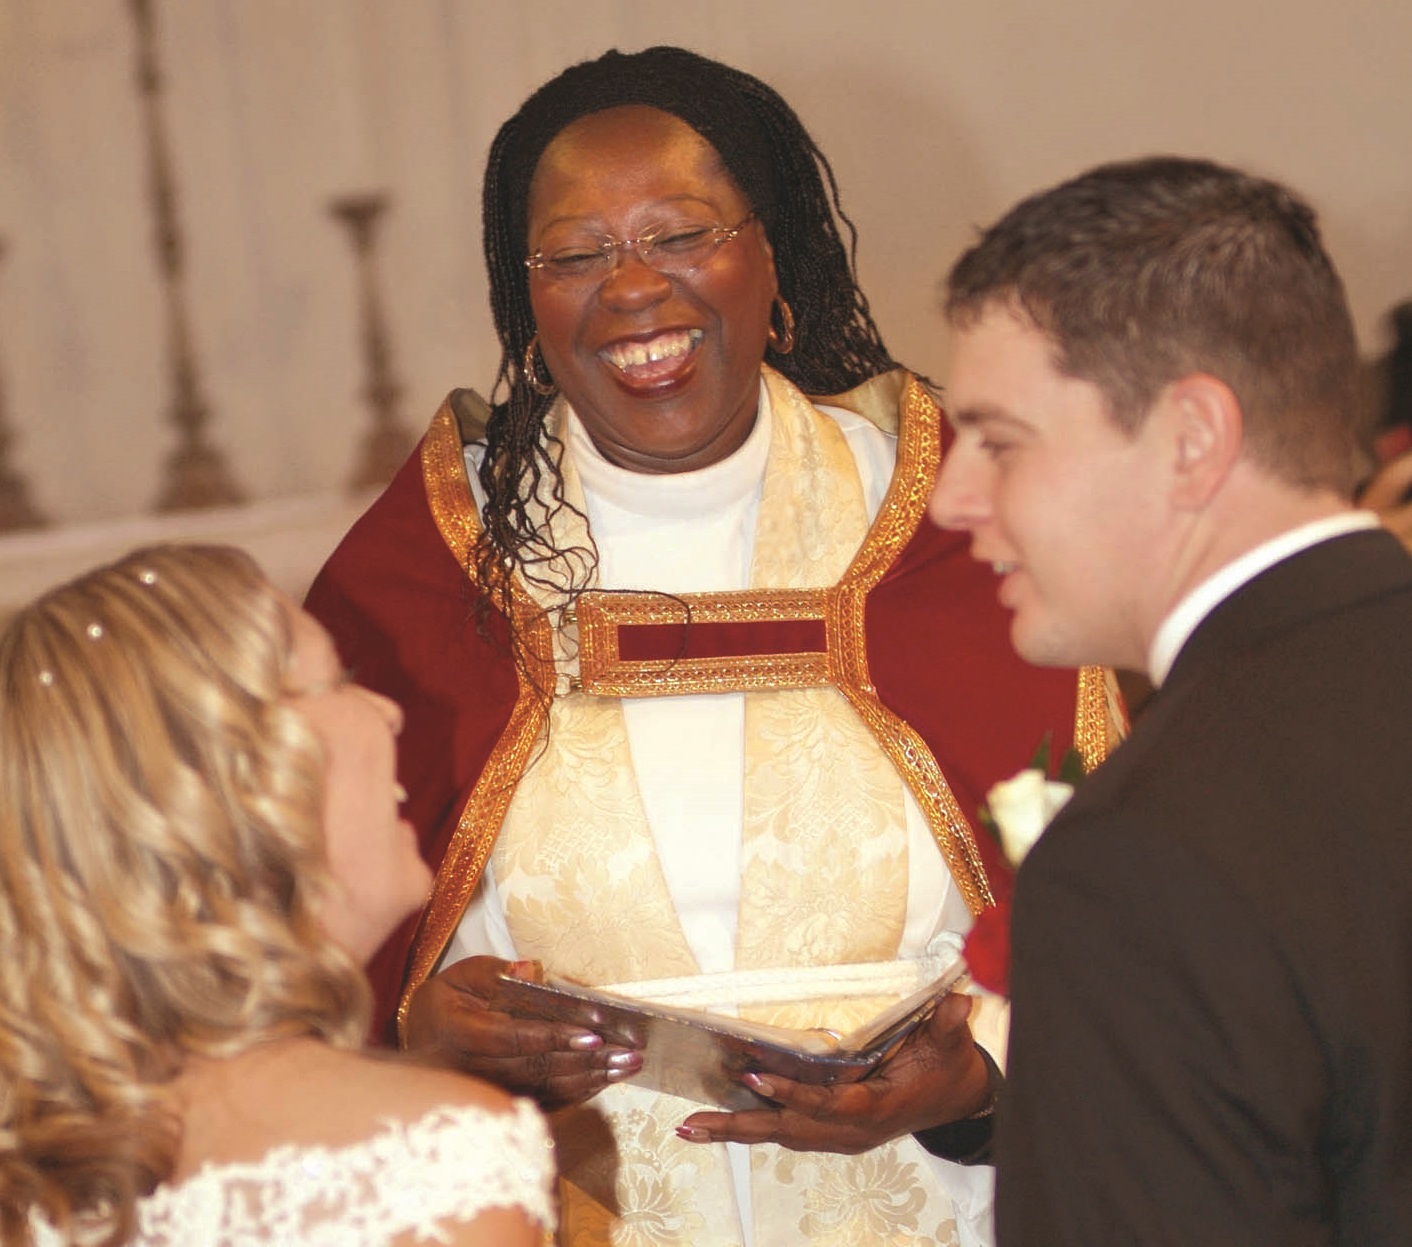 A vicar laughing with a wedding couple